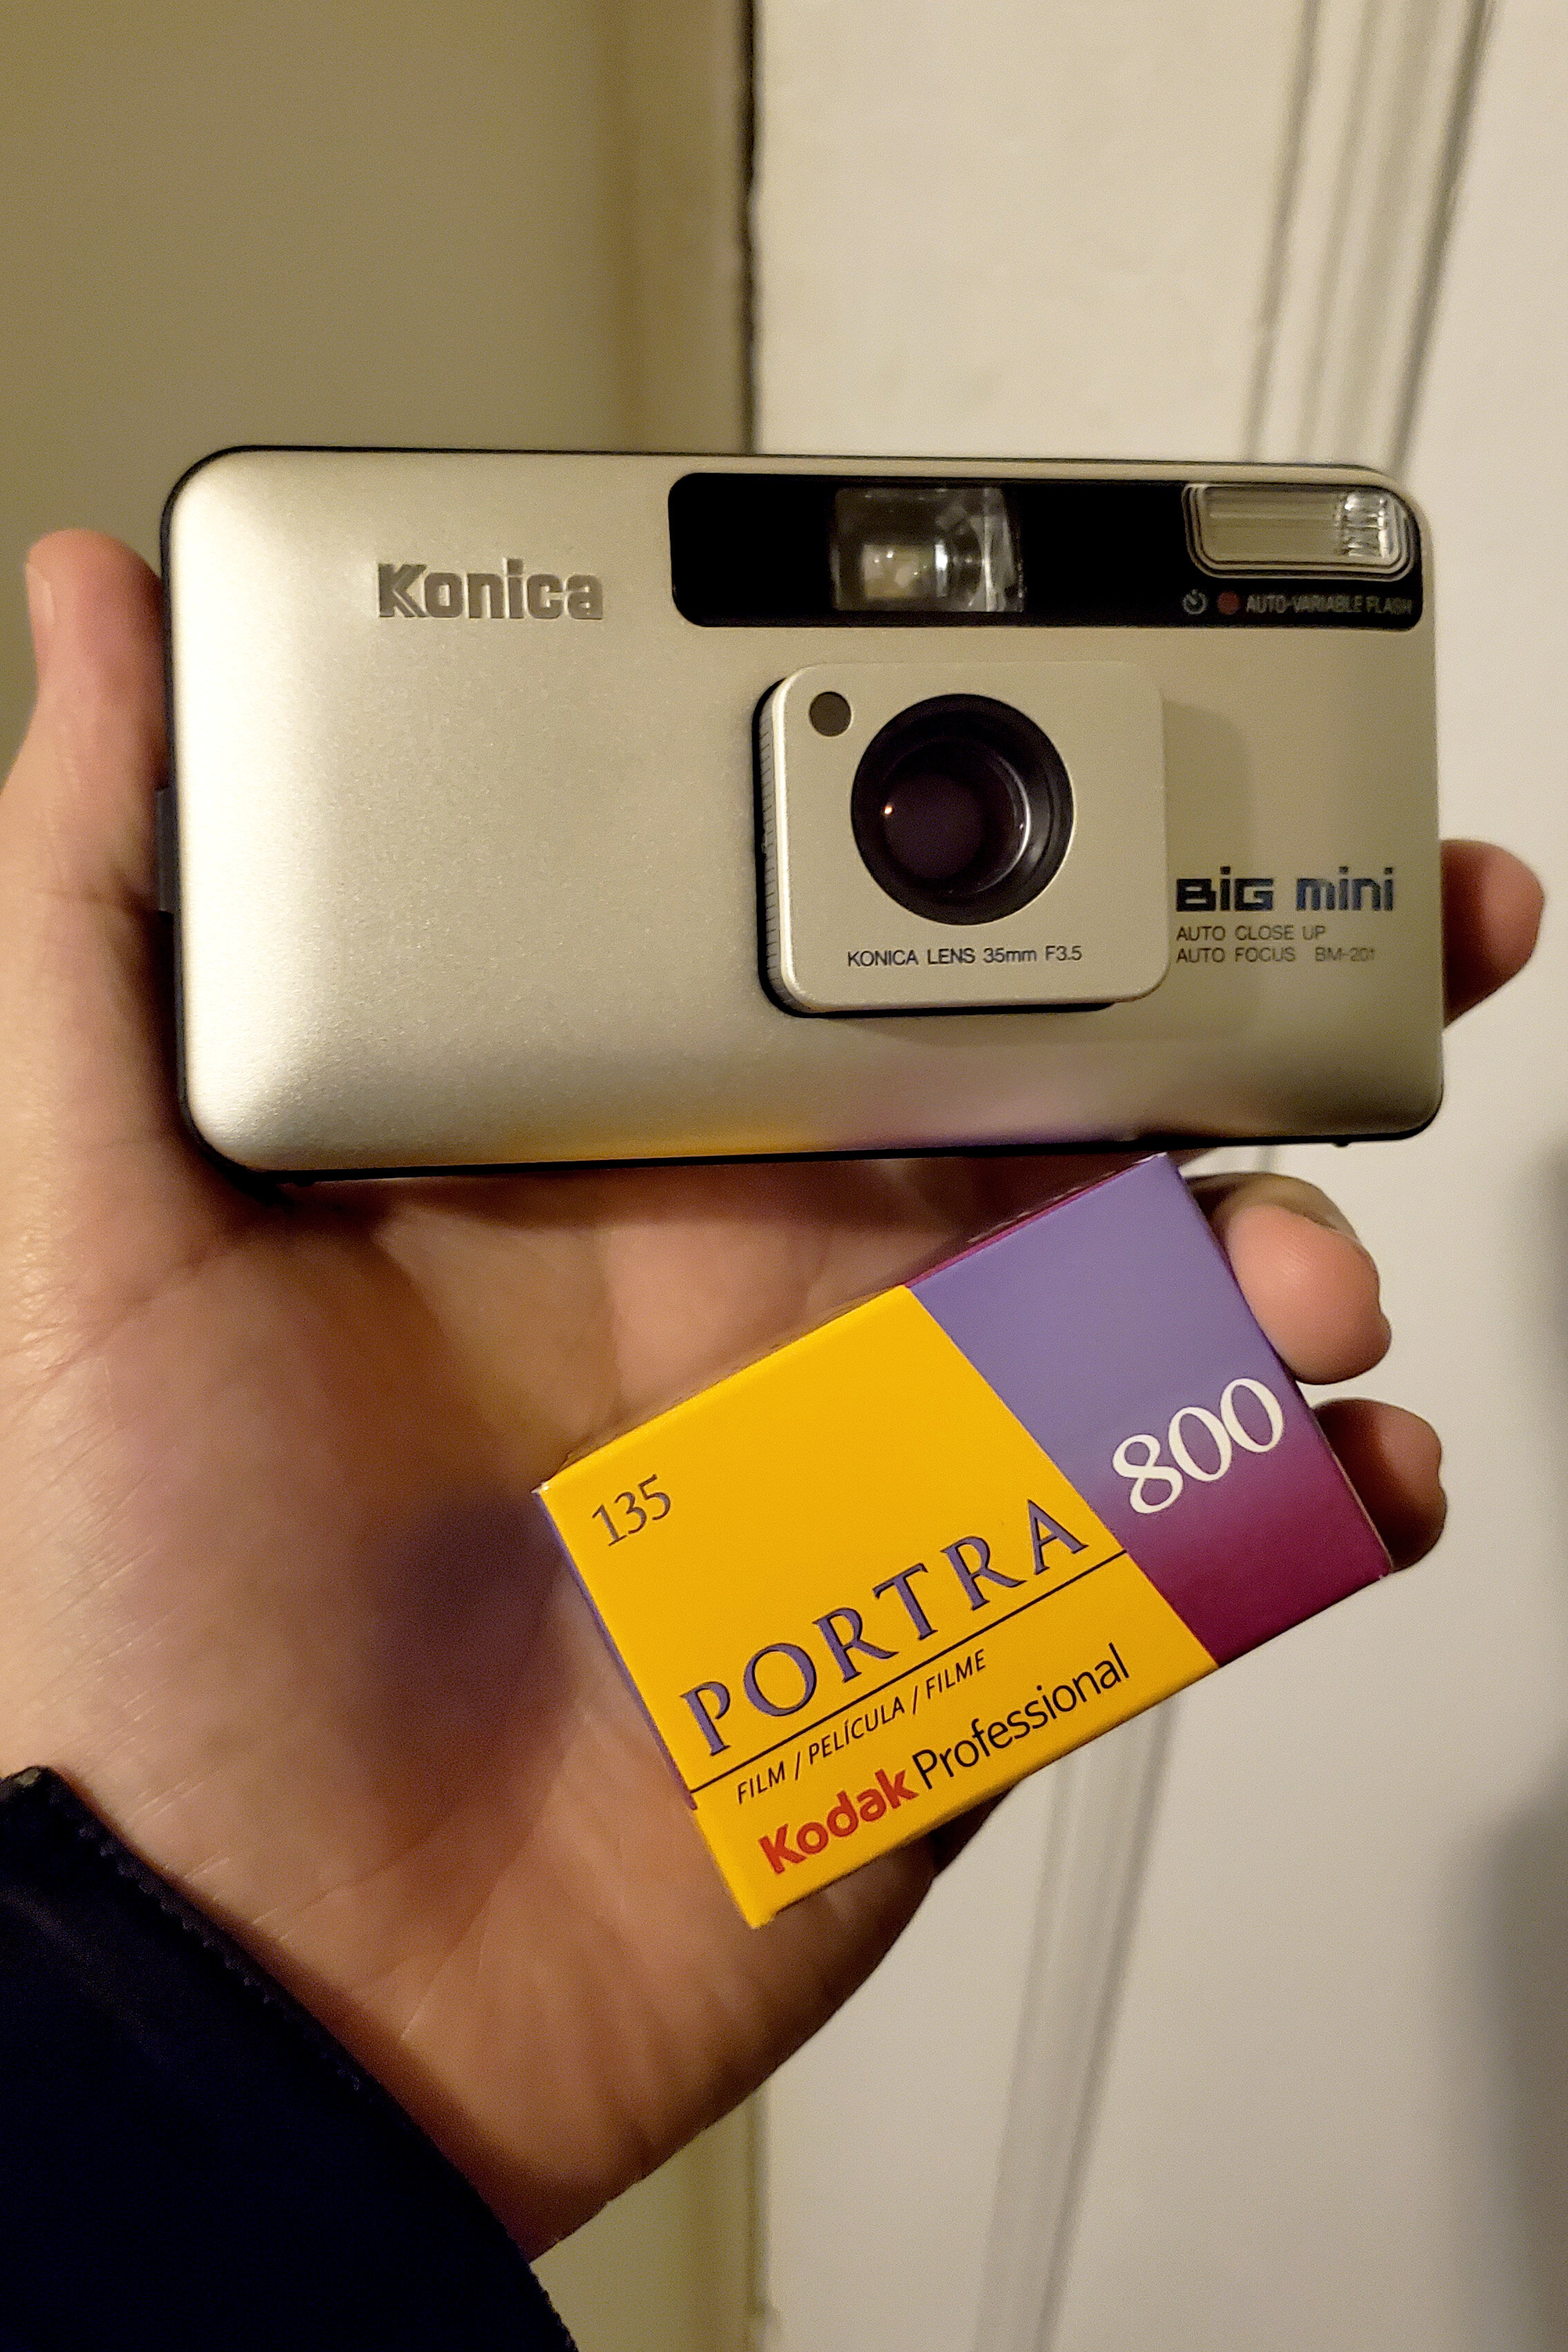 Part II: Shooting the Konica Big Mini BM-201 [Review with Sample